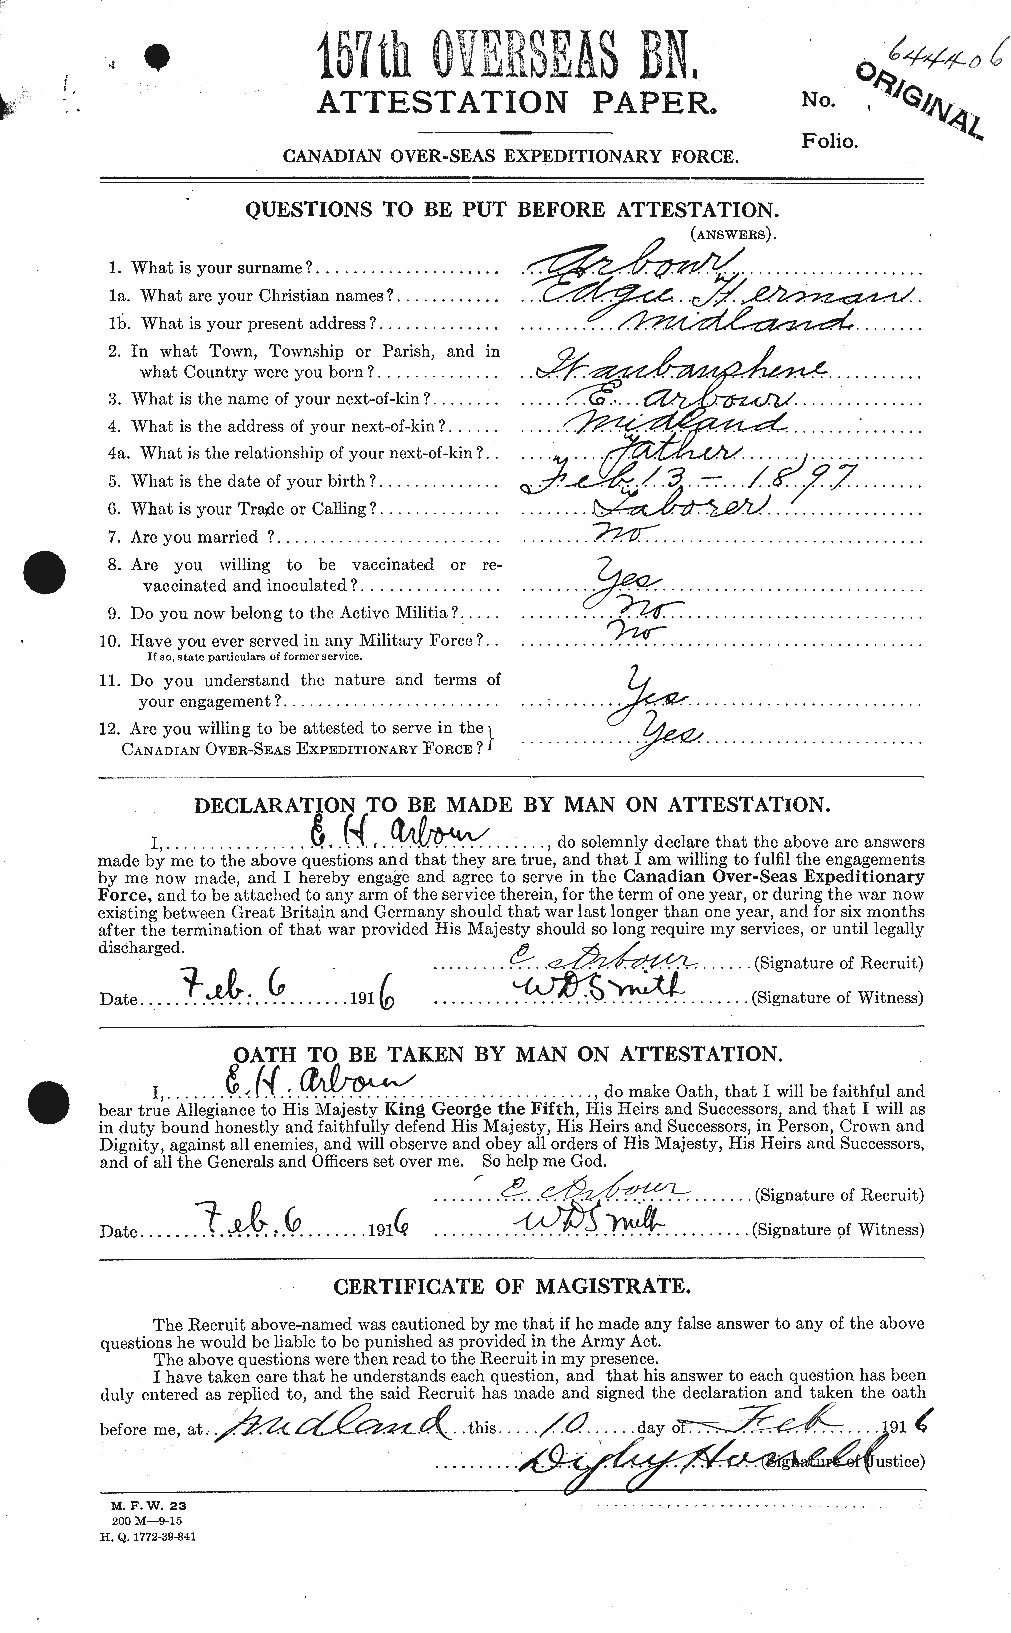 Personnel Records of the First World War - CEF 211080a